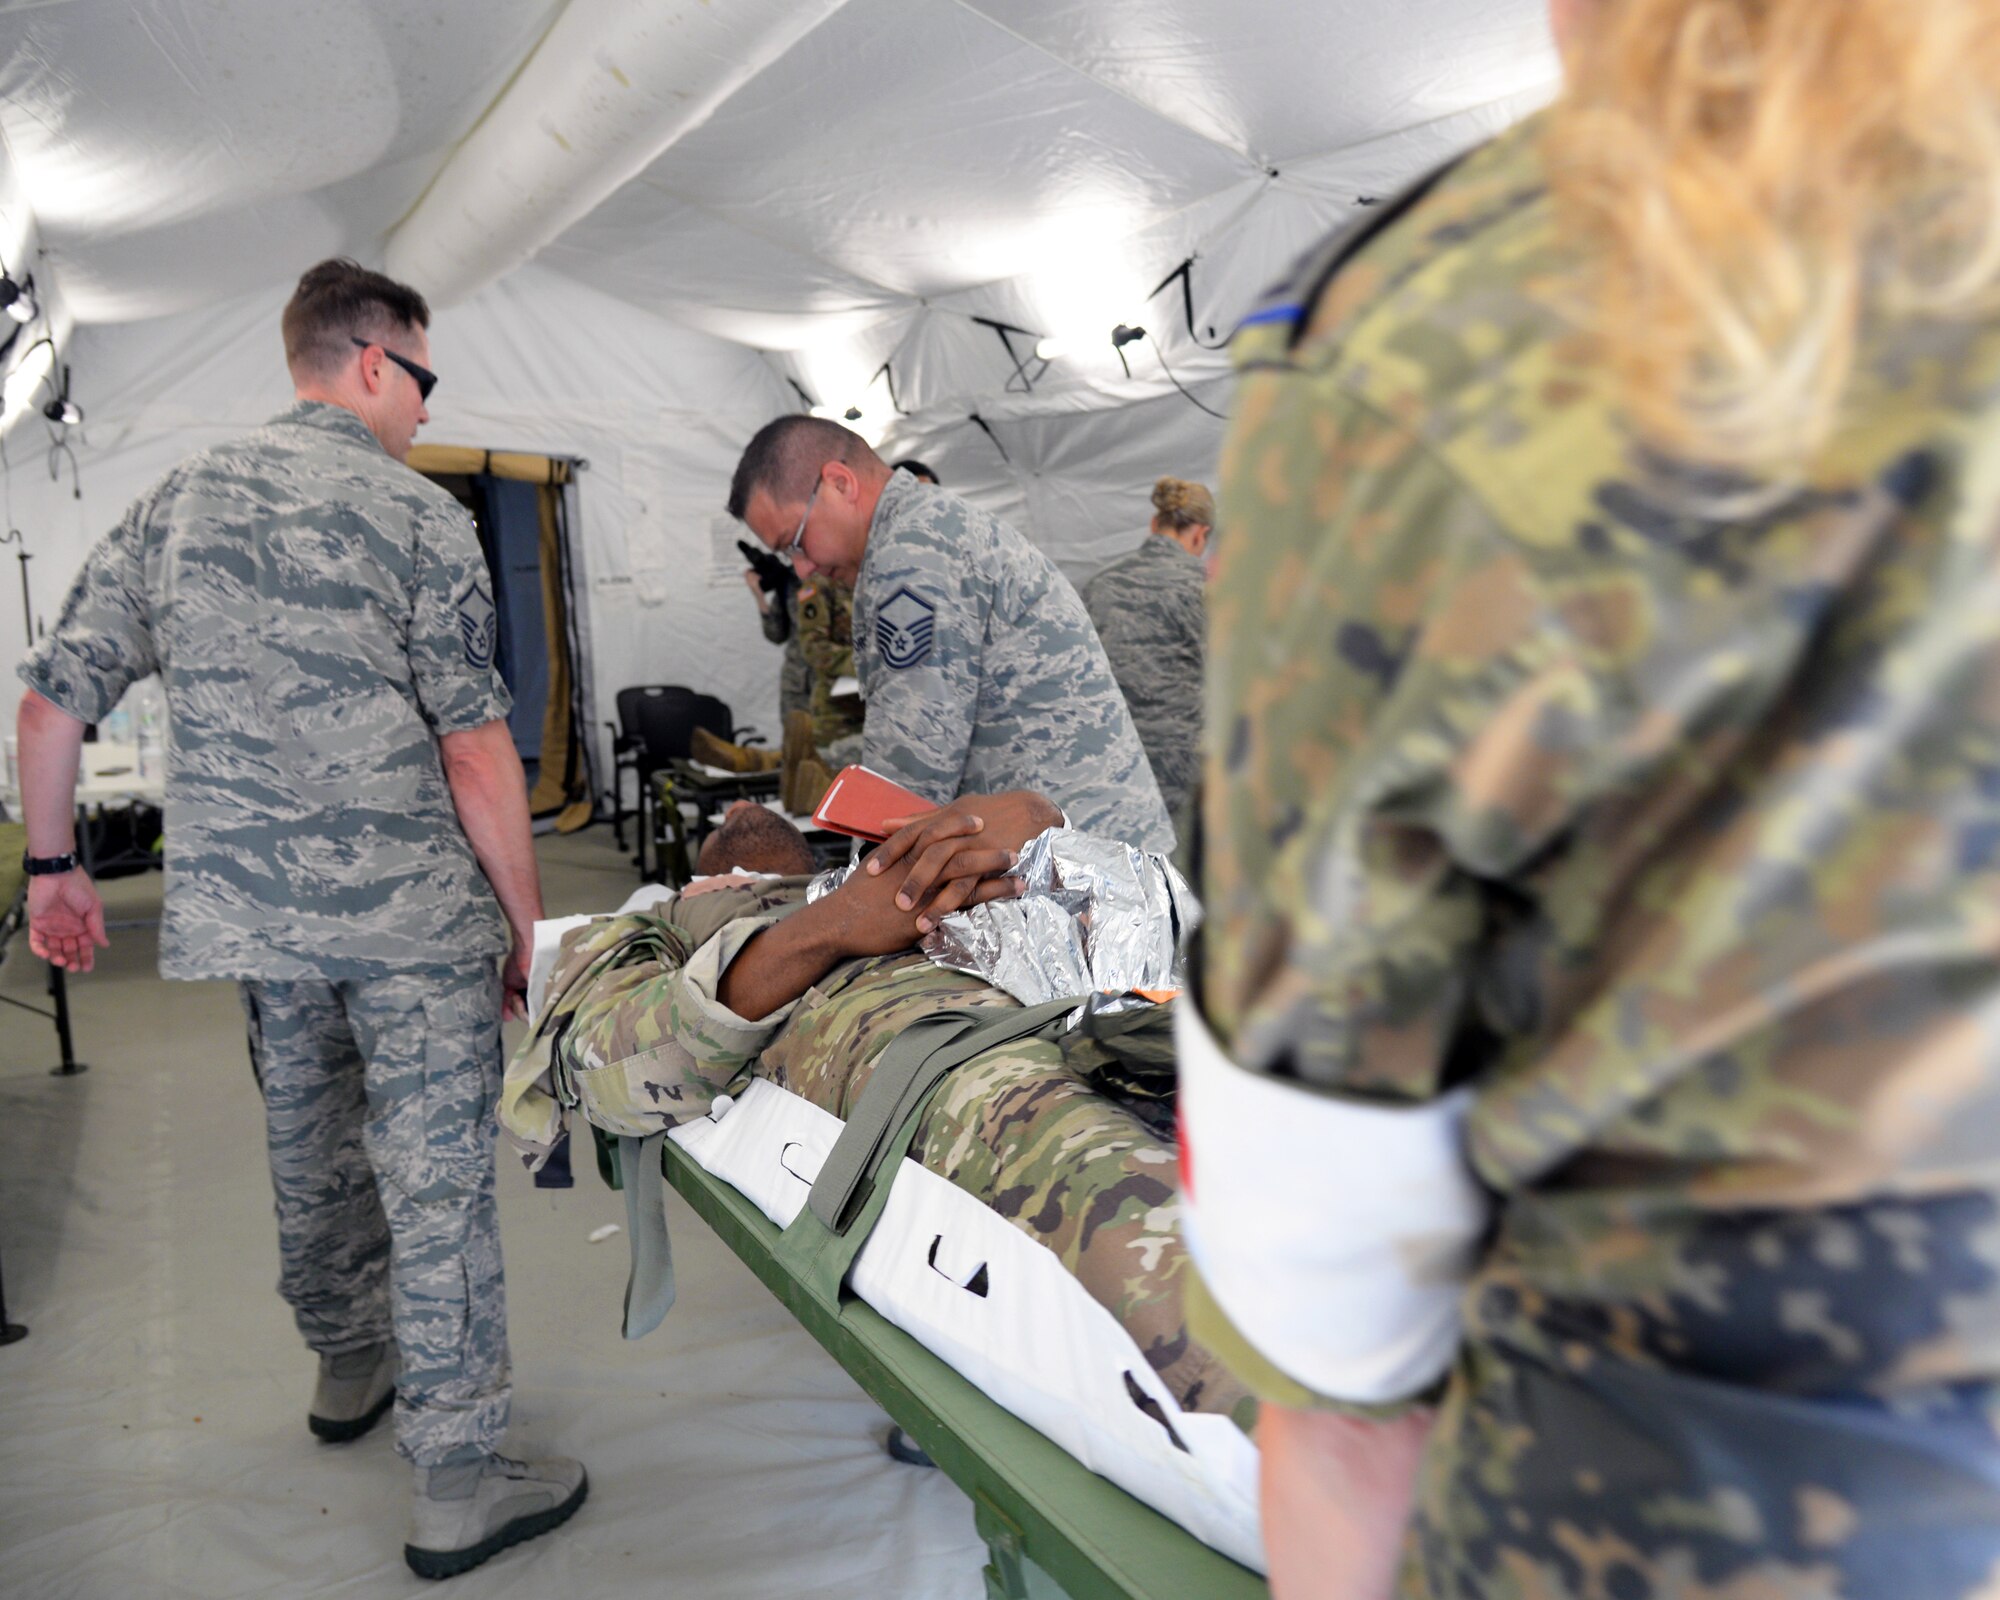 Airmen from the 86th Medical Group conducted Ability to Survive and Operate training in an Expeditionary Medical Support System modular field hospital during en route patient staging training during Exercise Maroon Surge on Ramstein Air Base, Germany, June 9, 2018. ATSO training is designed to improve Airmen’s performance during stressful circumstances. (U.S. Air Force photo by Airman 1st Class Ariel Leighty)